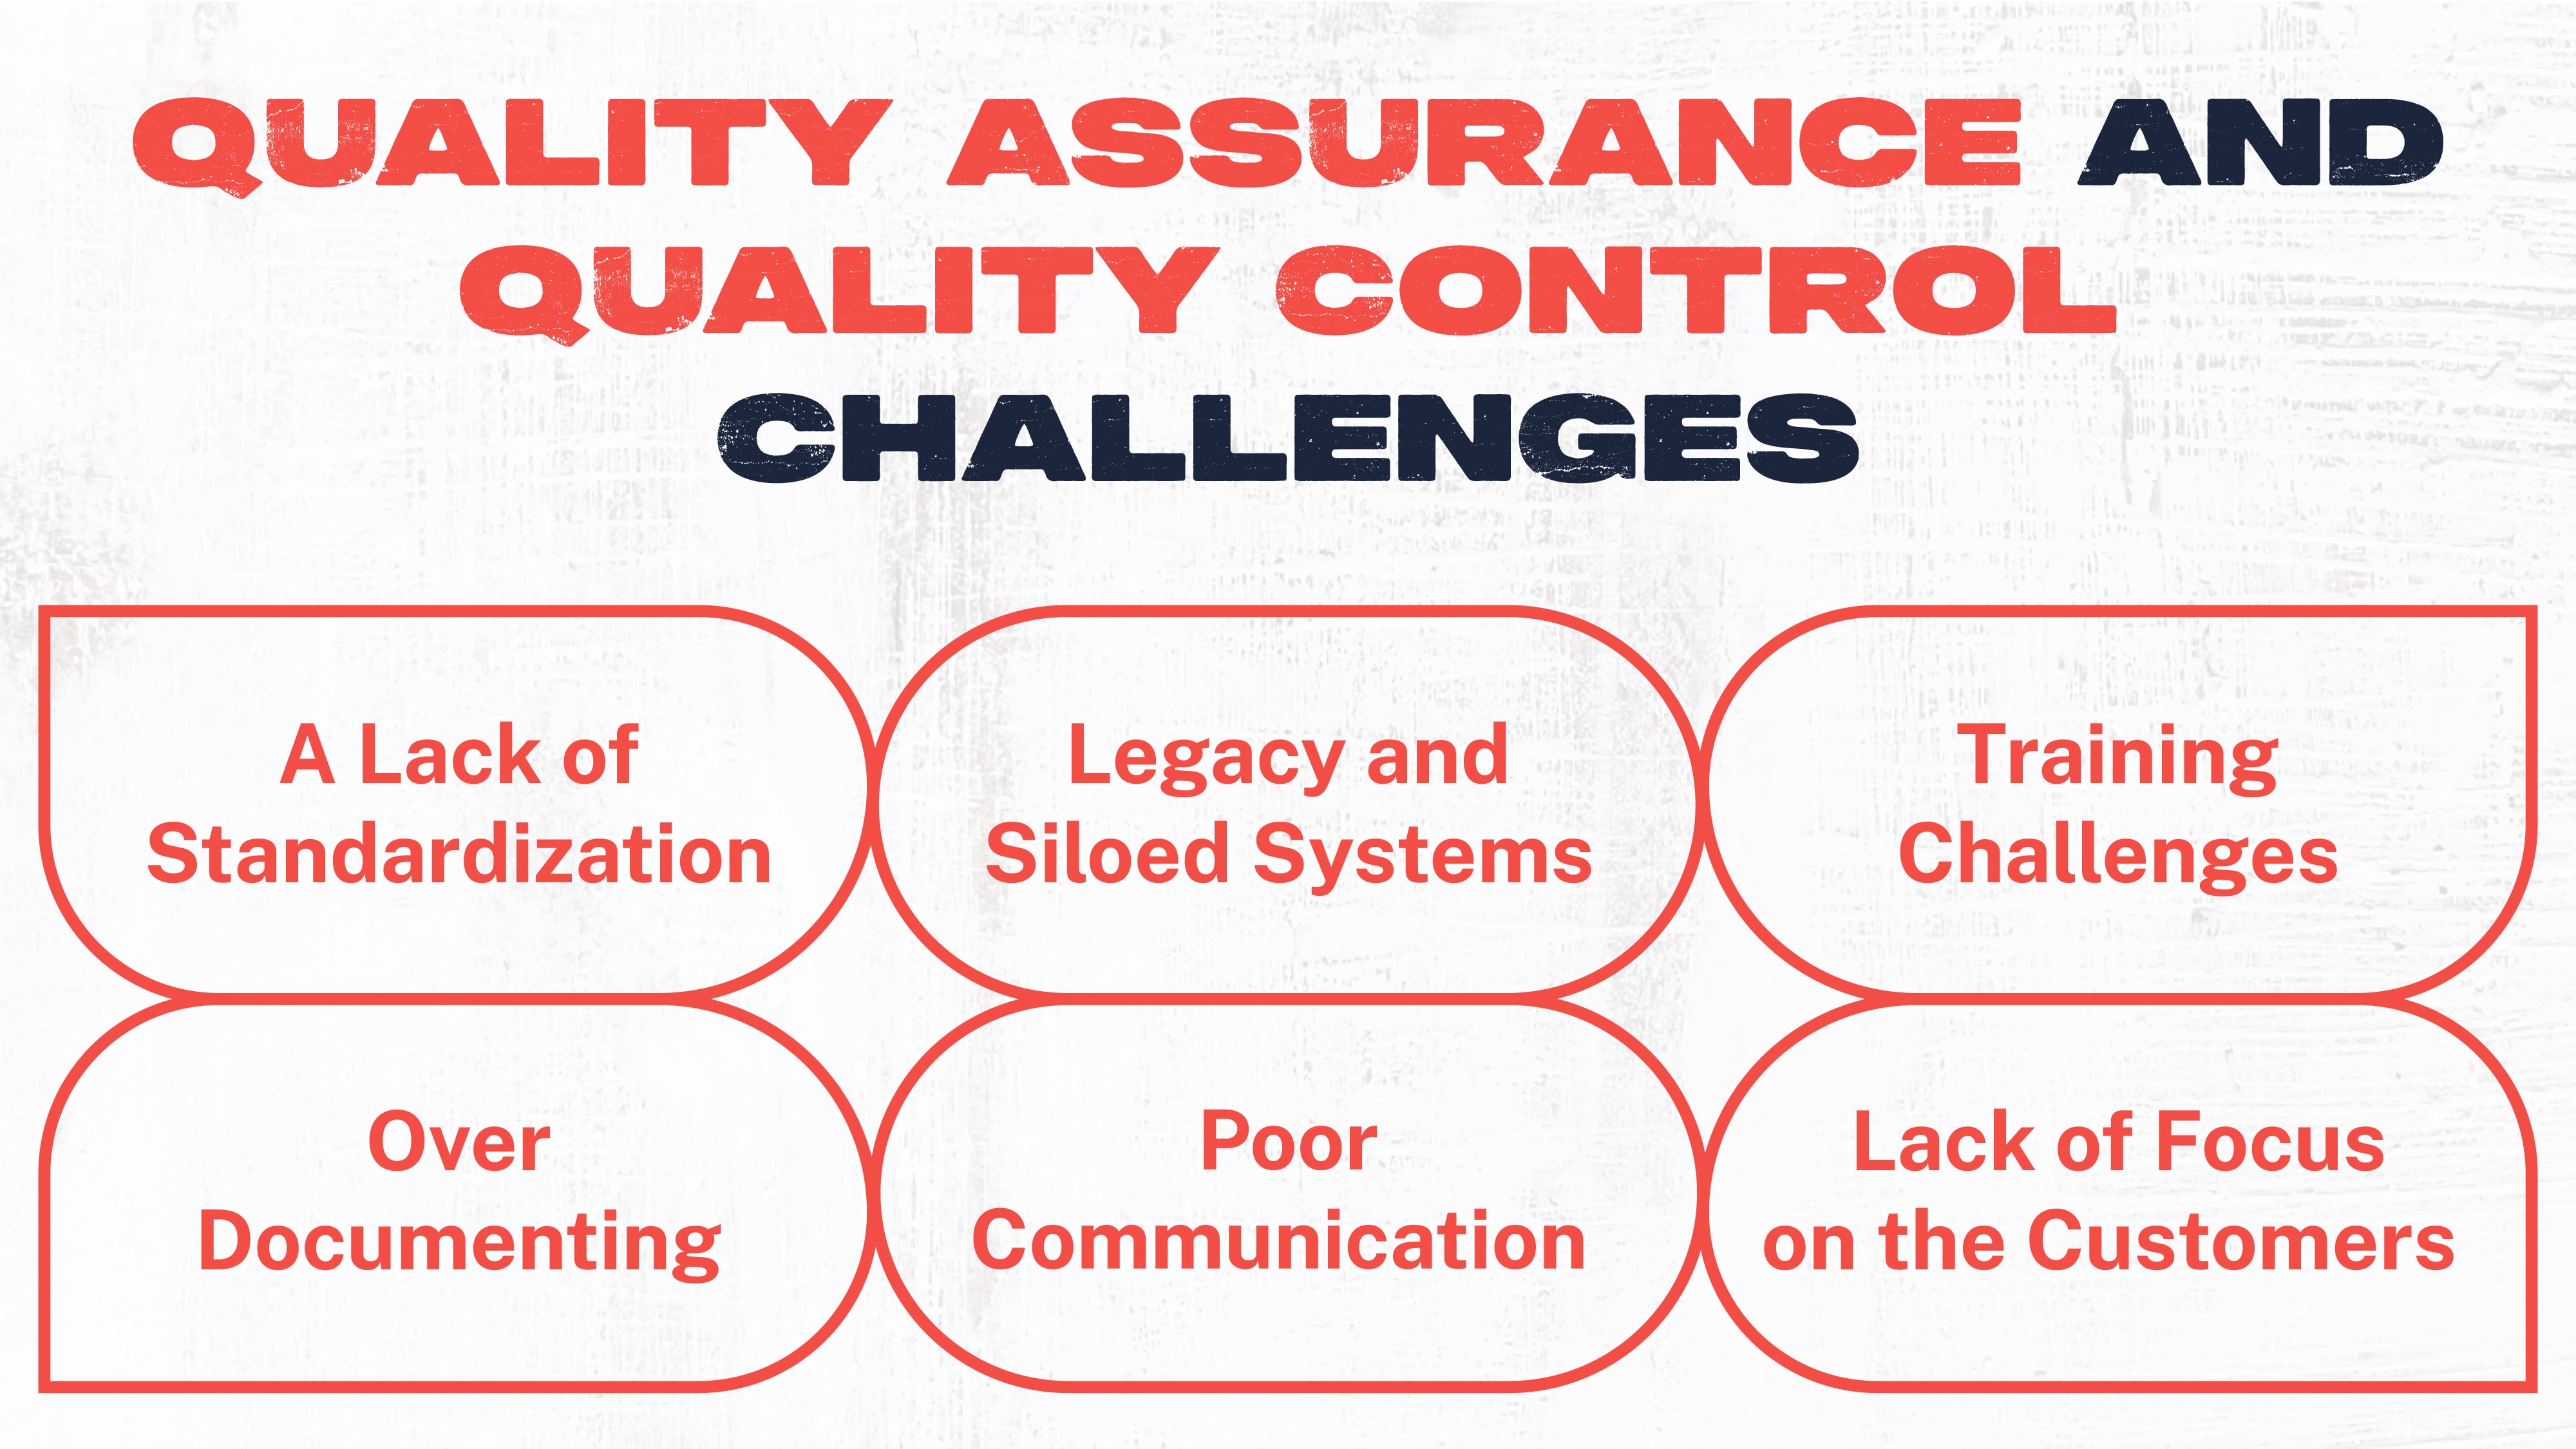 Quality Assurance and Quality Control Challenges